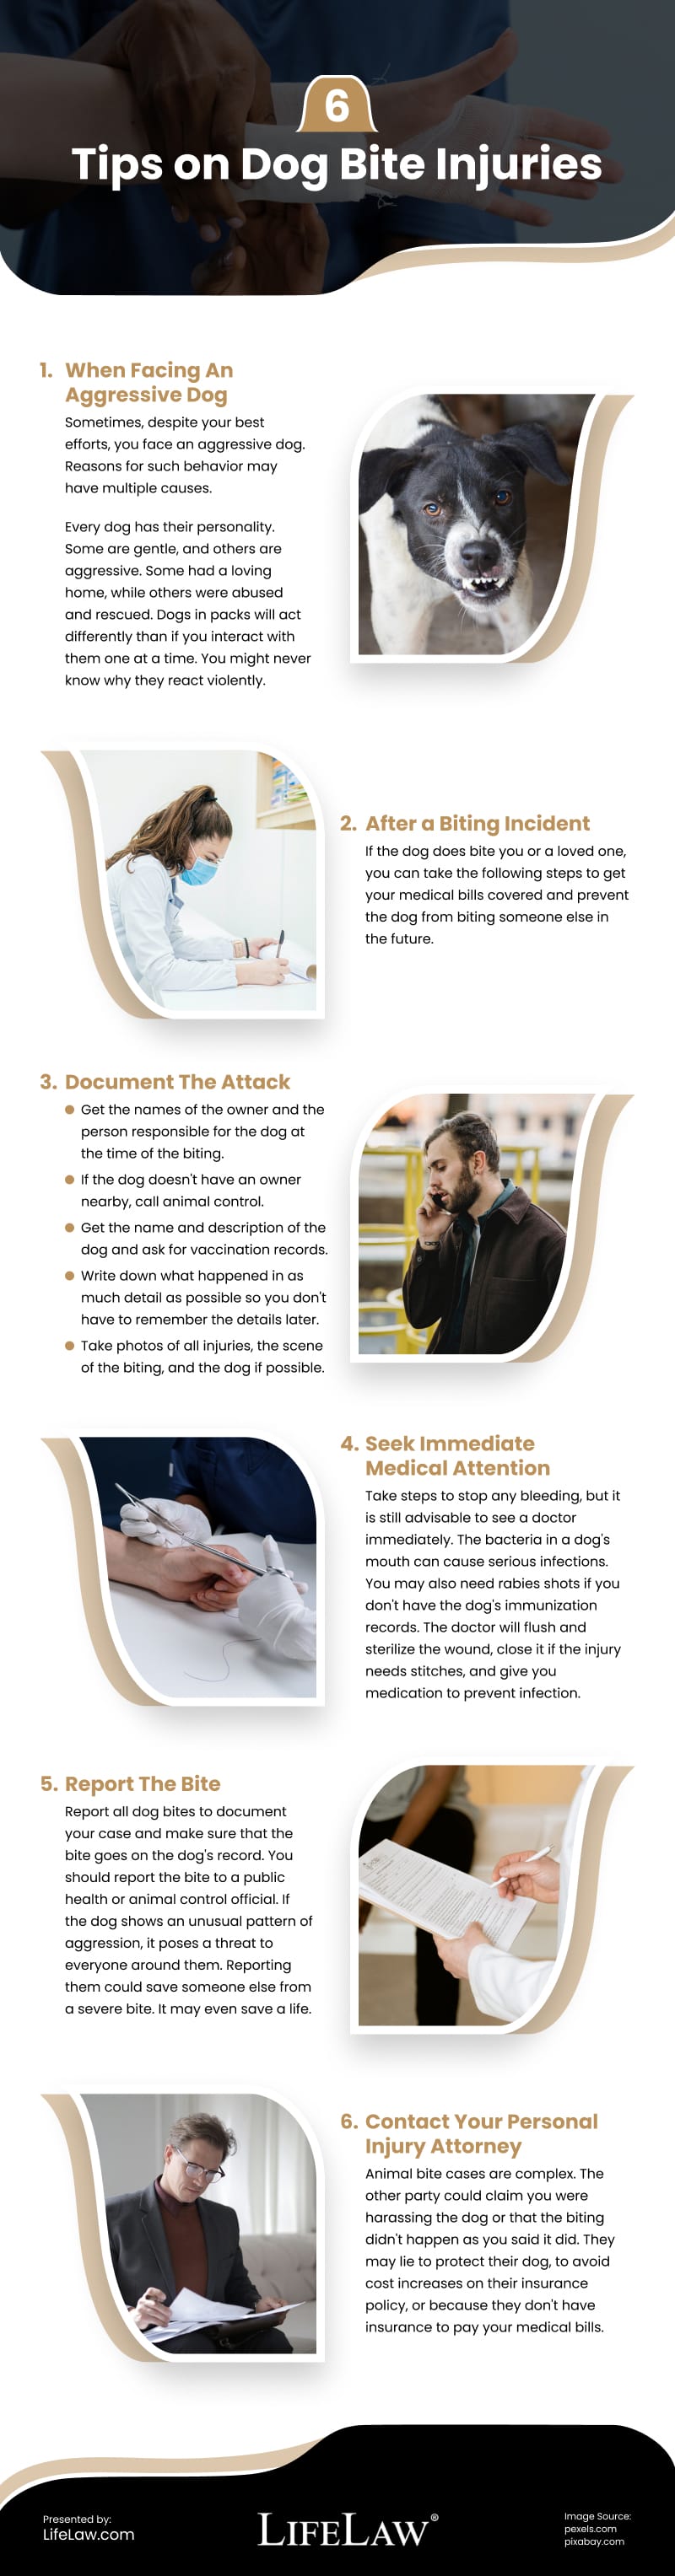 6 Tips on Dog Bite Injuries Infographic